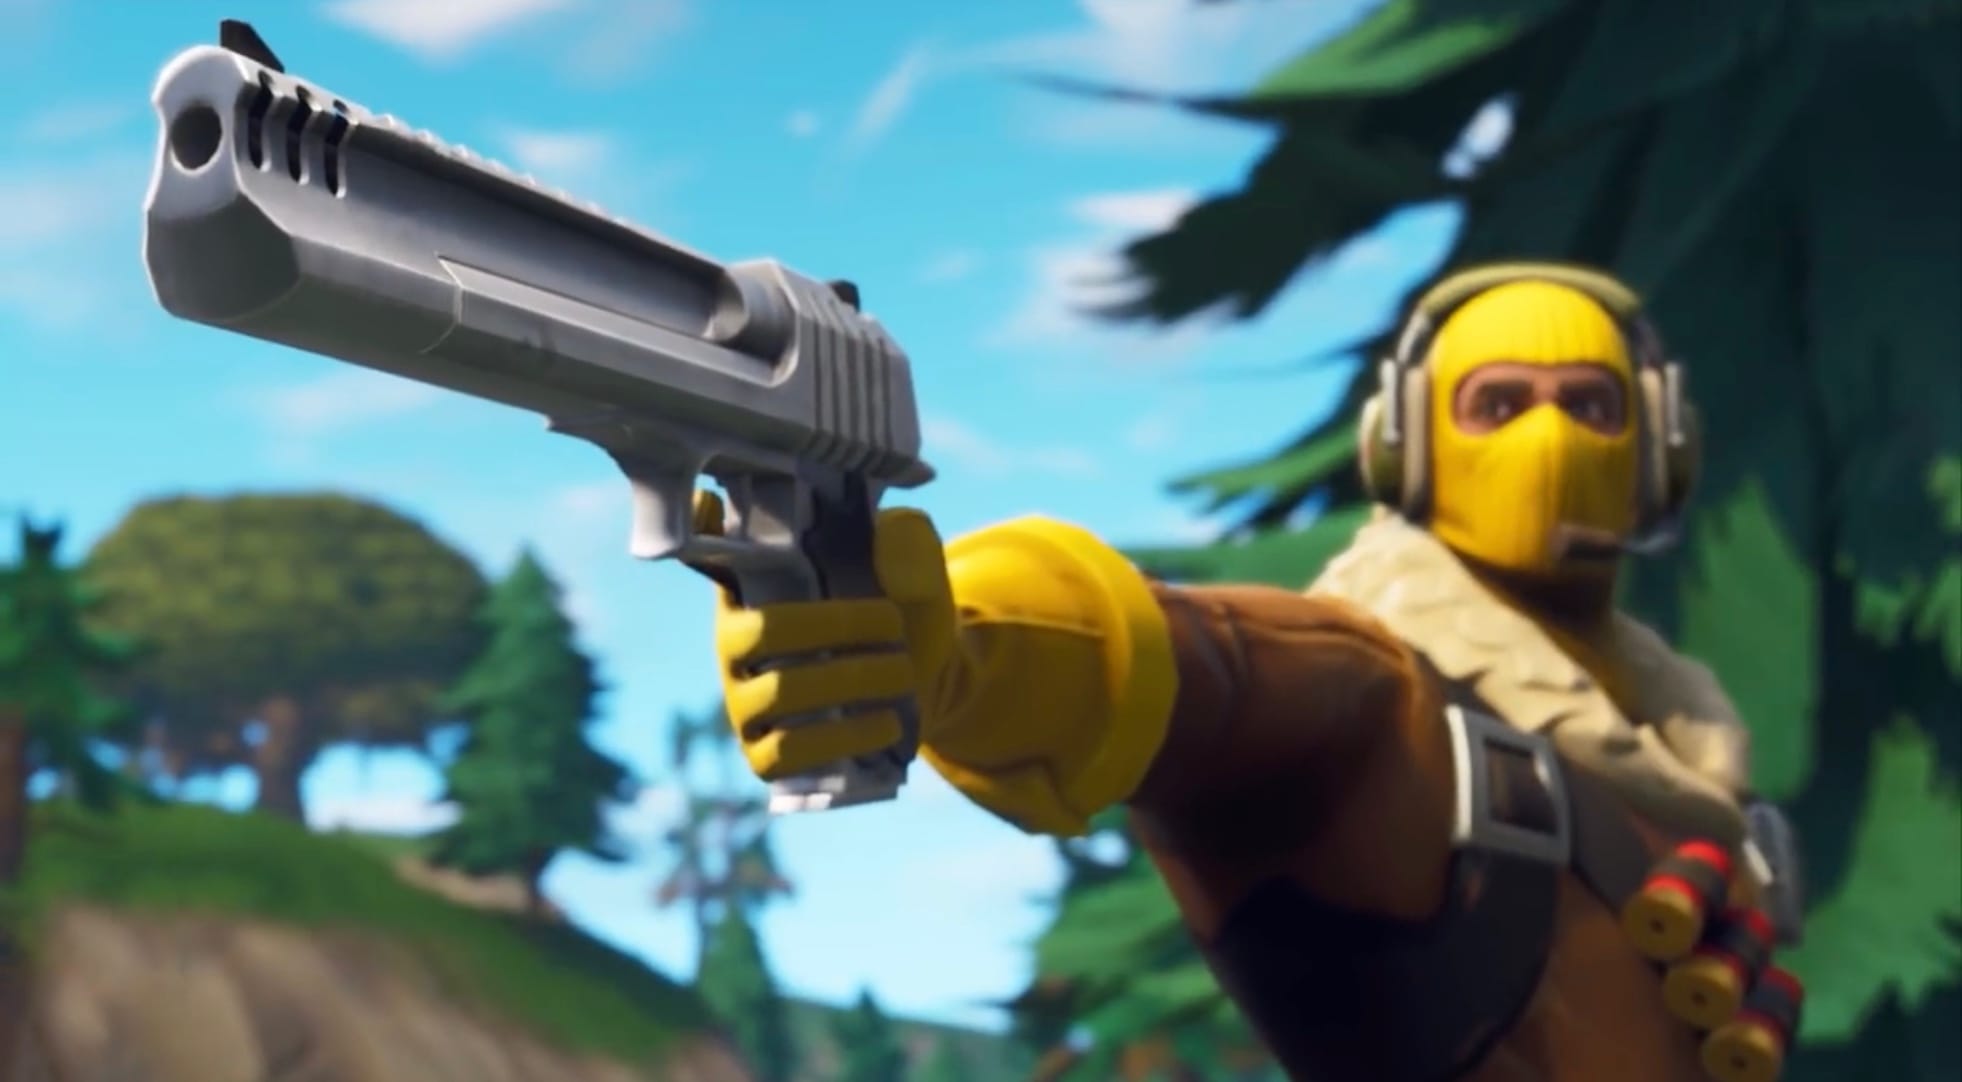 Fortnite pro banned for life after public cheating